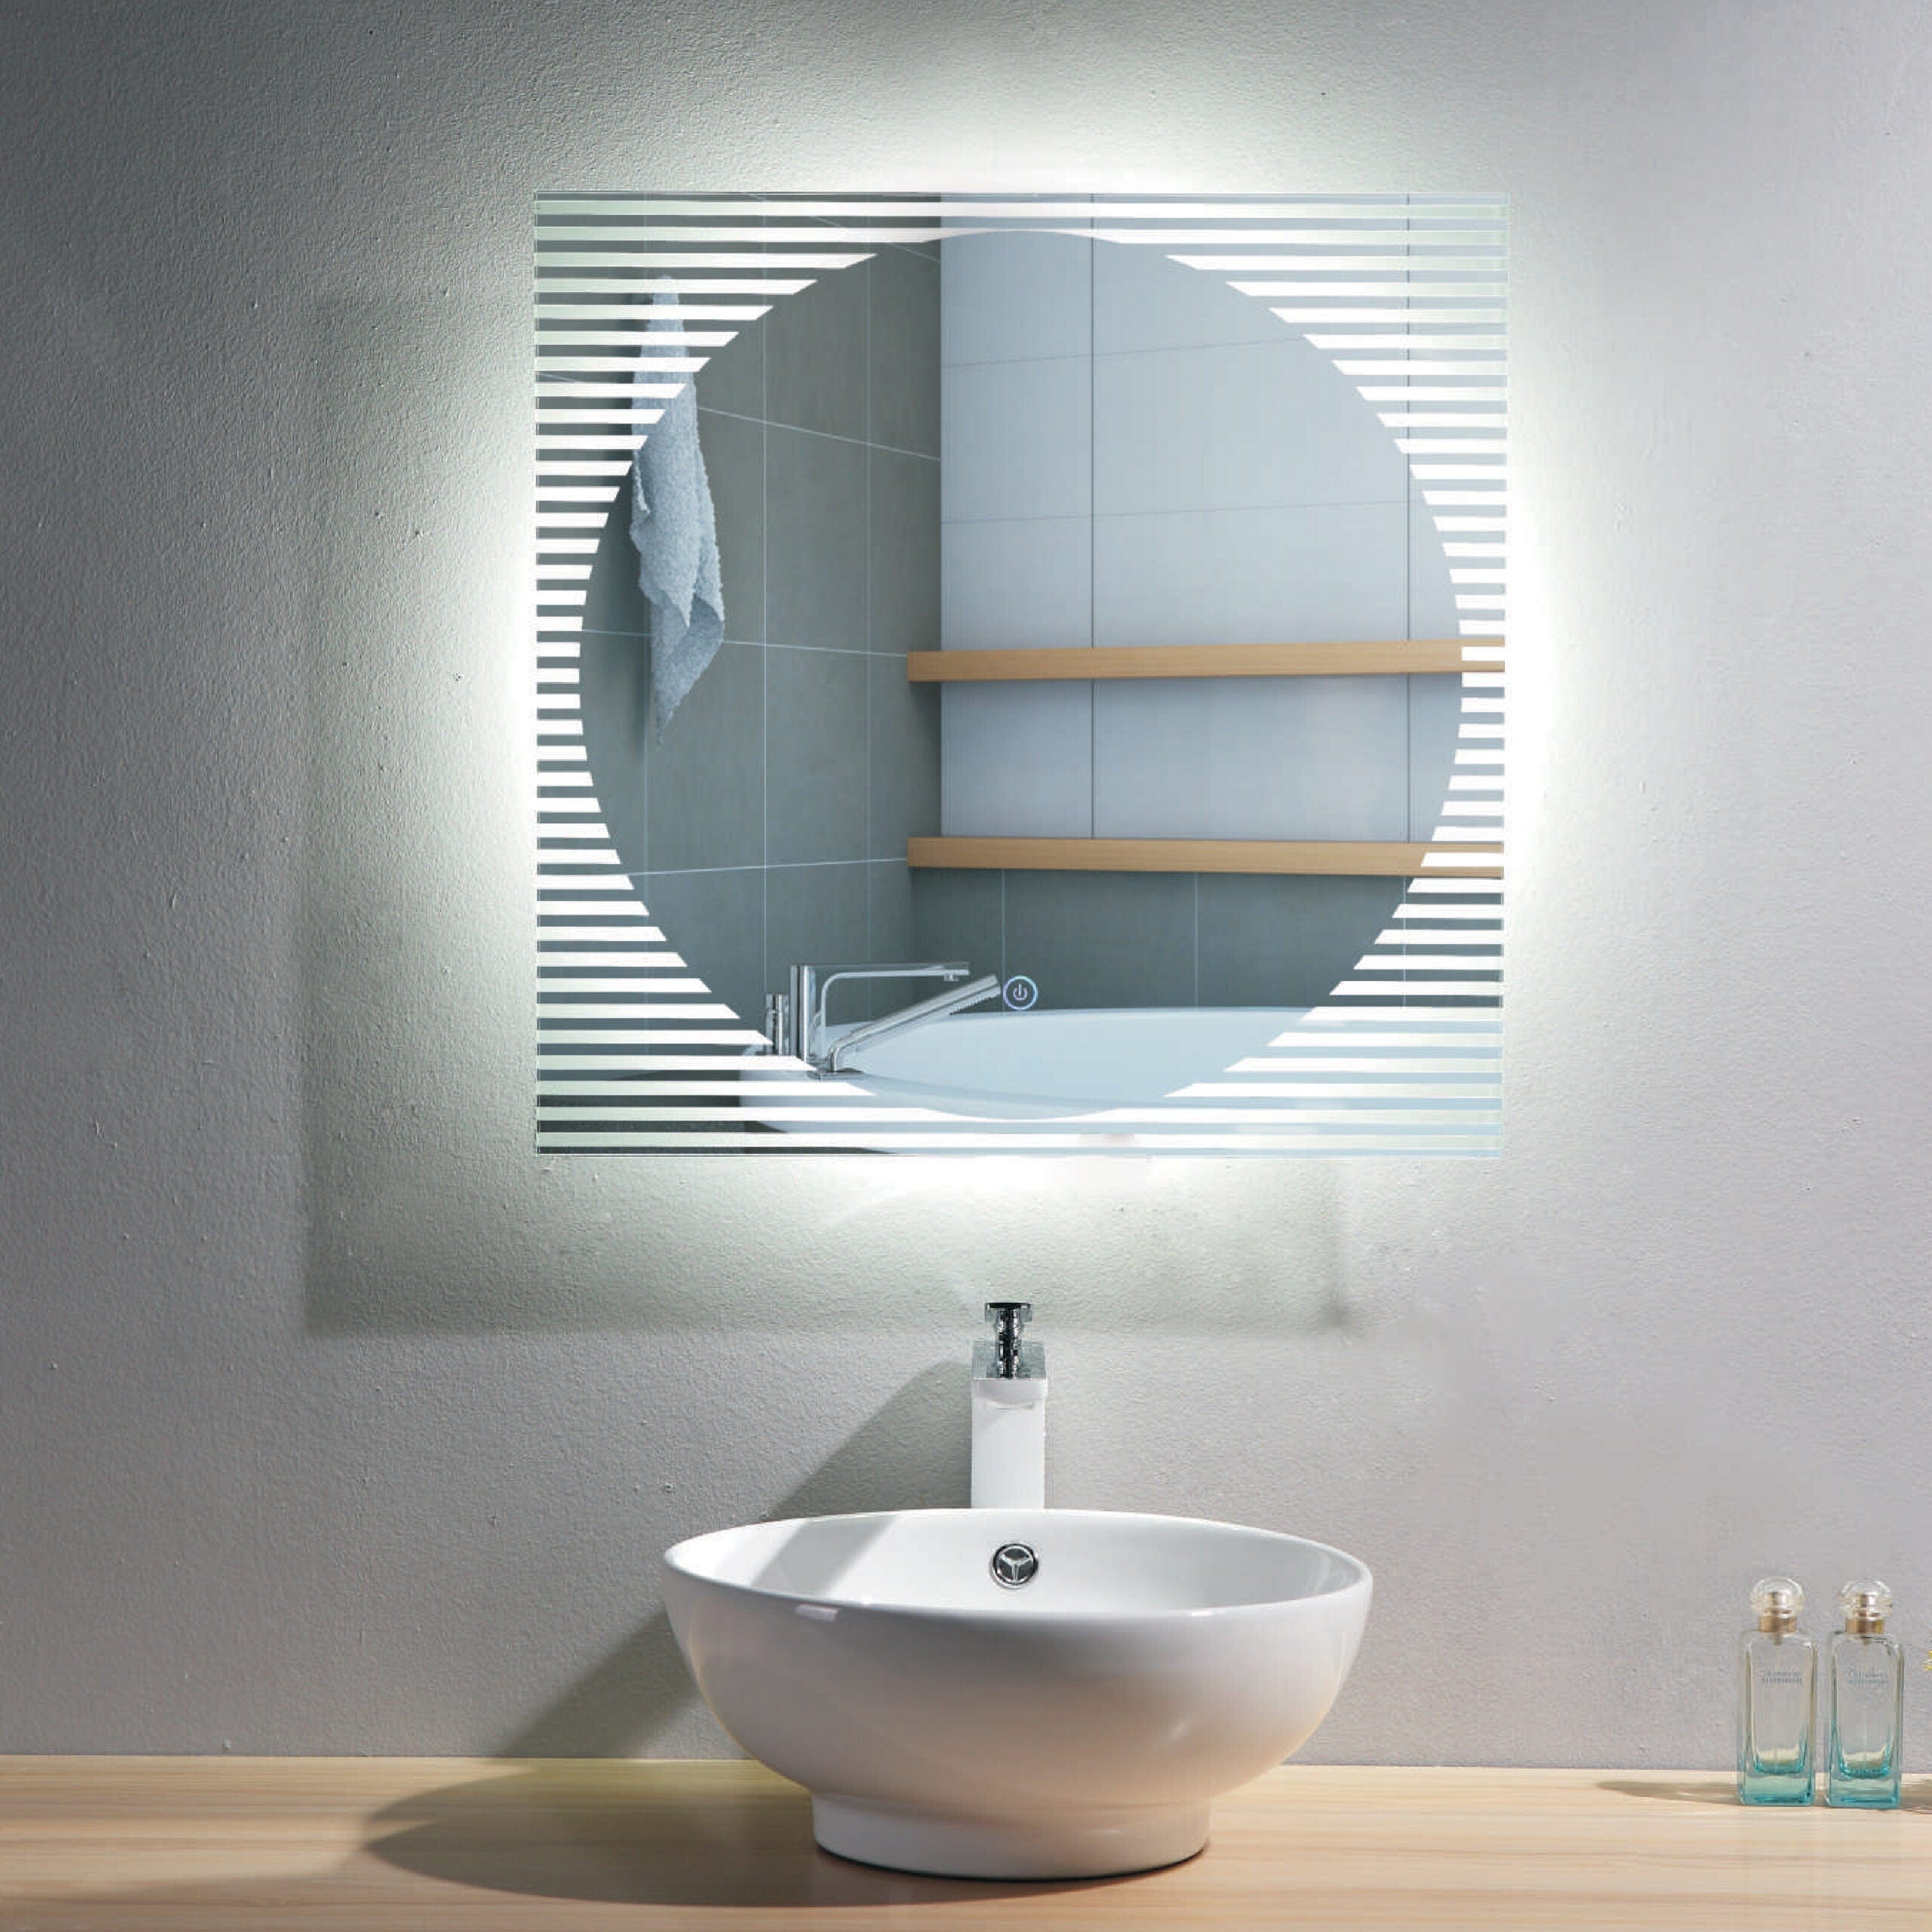 Tredex Square LED Bathroom Mirror with Steel Frame & Touch Button - N064 | Supply Master | Accra, Ghana Shower Caddy & Mirror Buy Tools hardware Building materials